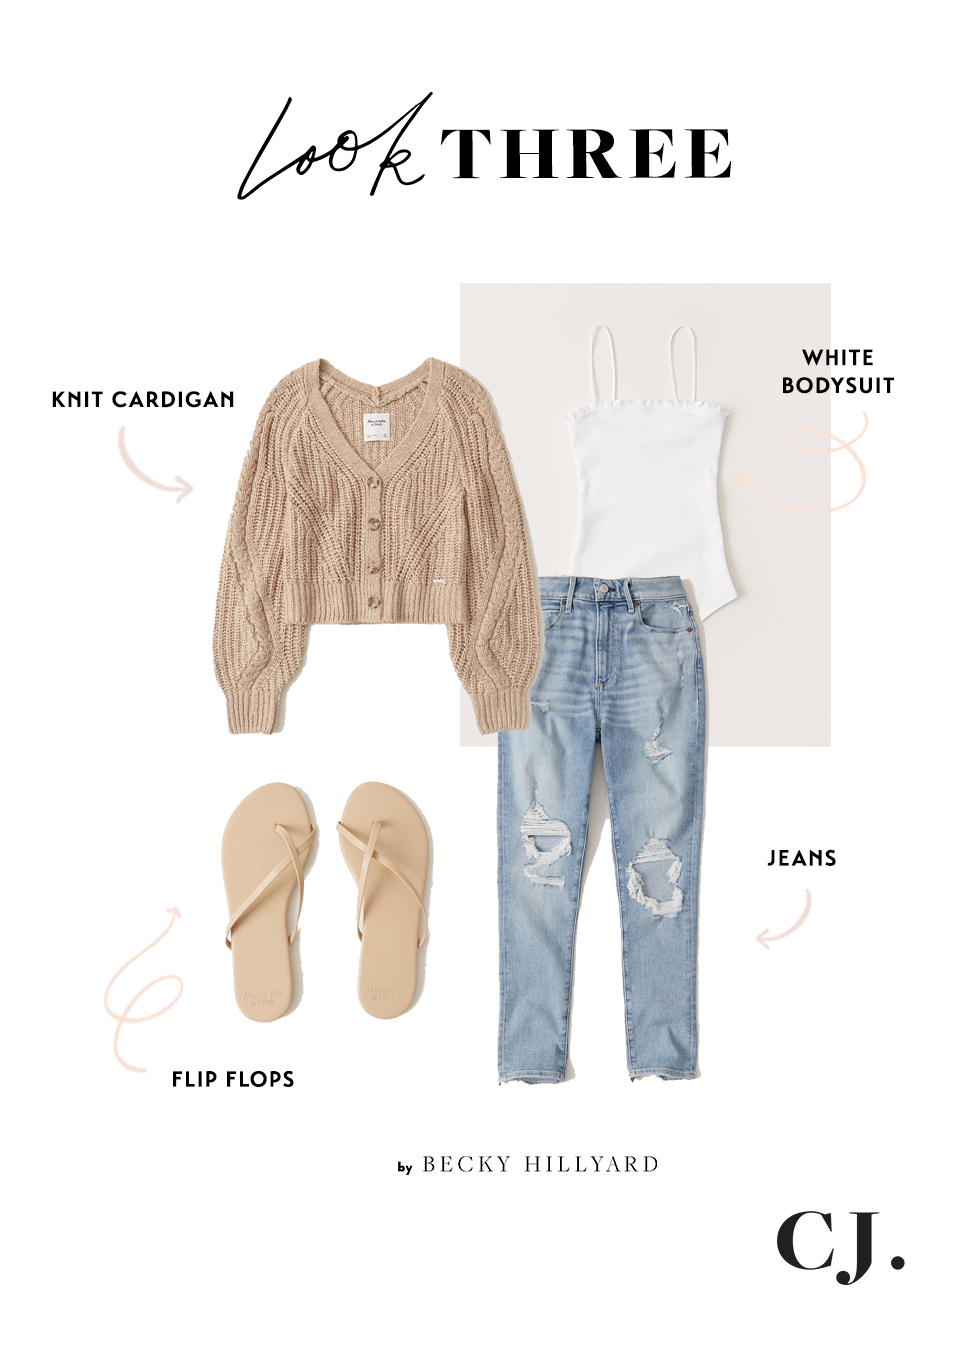 5 CASUAL LOOKS TO WEAR AT HOME